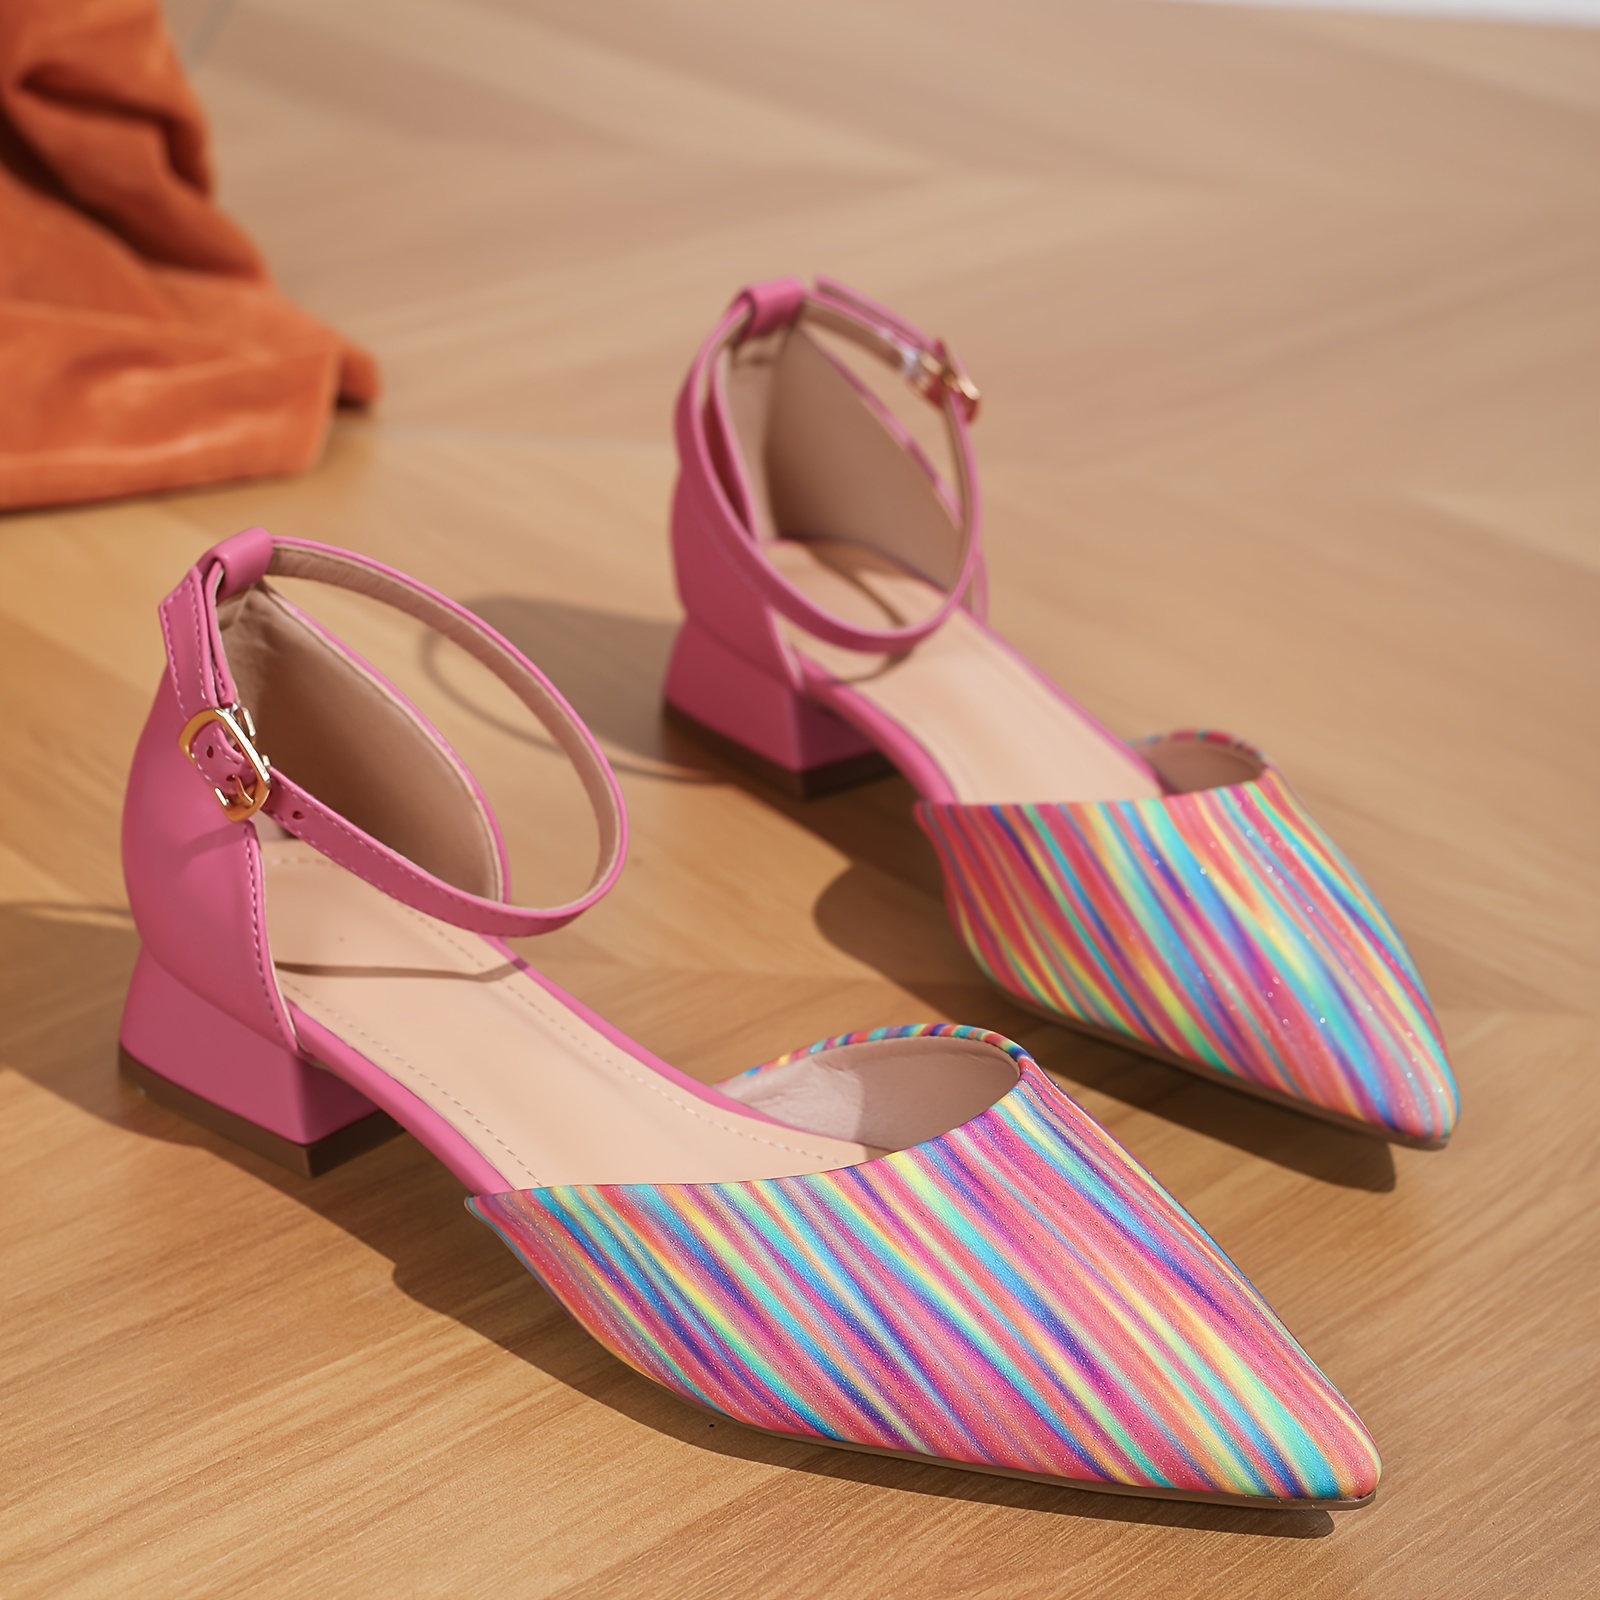 

Women's Colorful Striped Low Heeled Sandals, Stylish Pointed Toe Ankle Strap D'orsay Shoes, Elegant Dating Summer Sandals